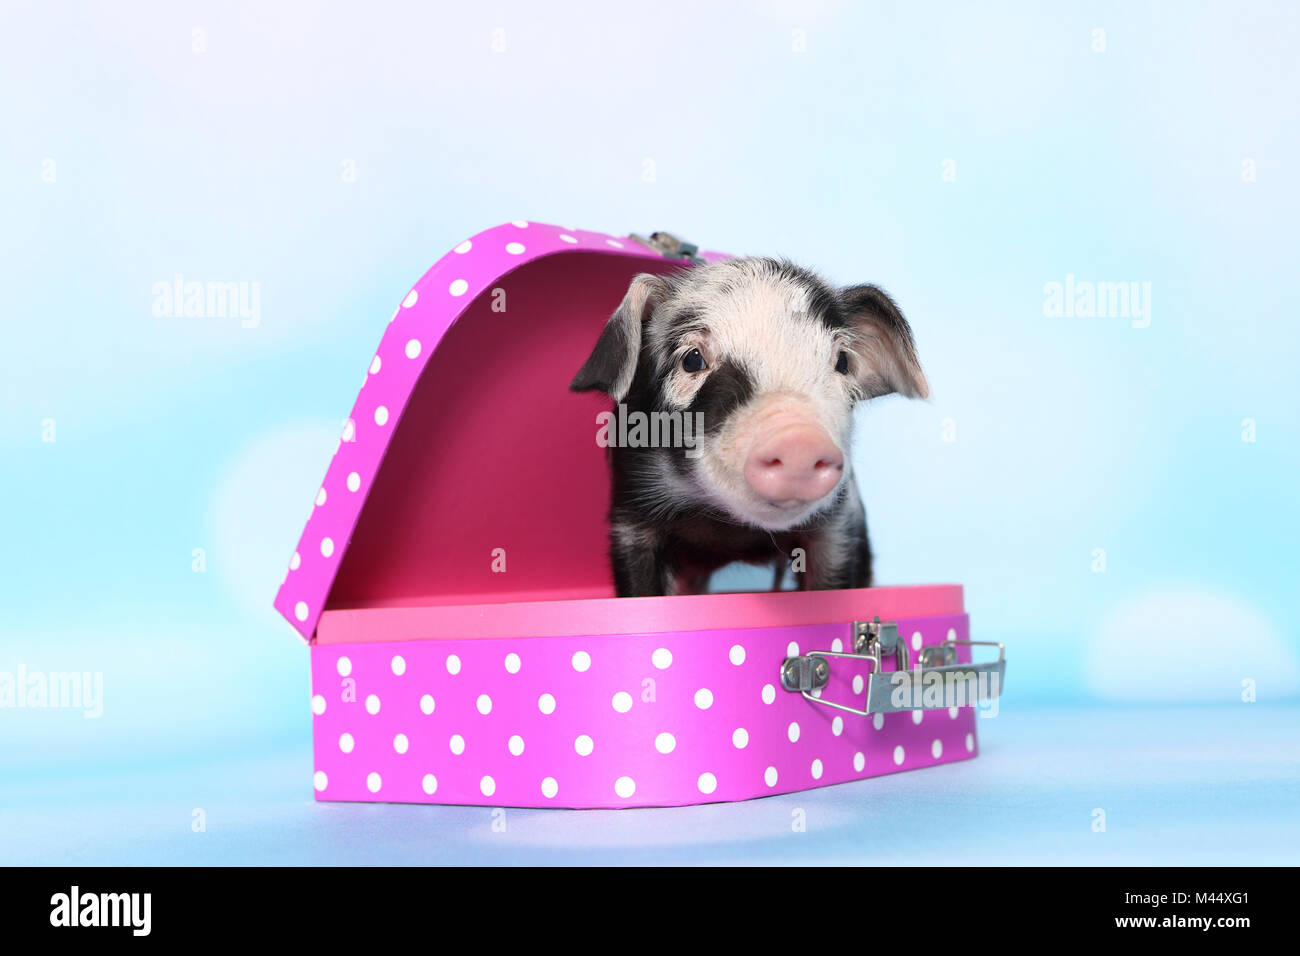 Domestic Pig, Turopolje x ?. Piglet (1 week old) in a pink suitcase with polka dots. Studio picture against a light blue background. Germany Stock Photo